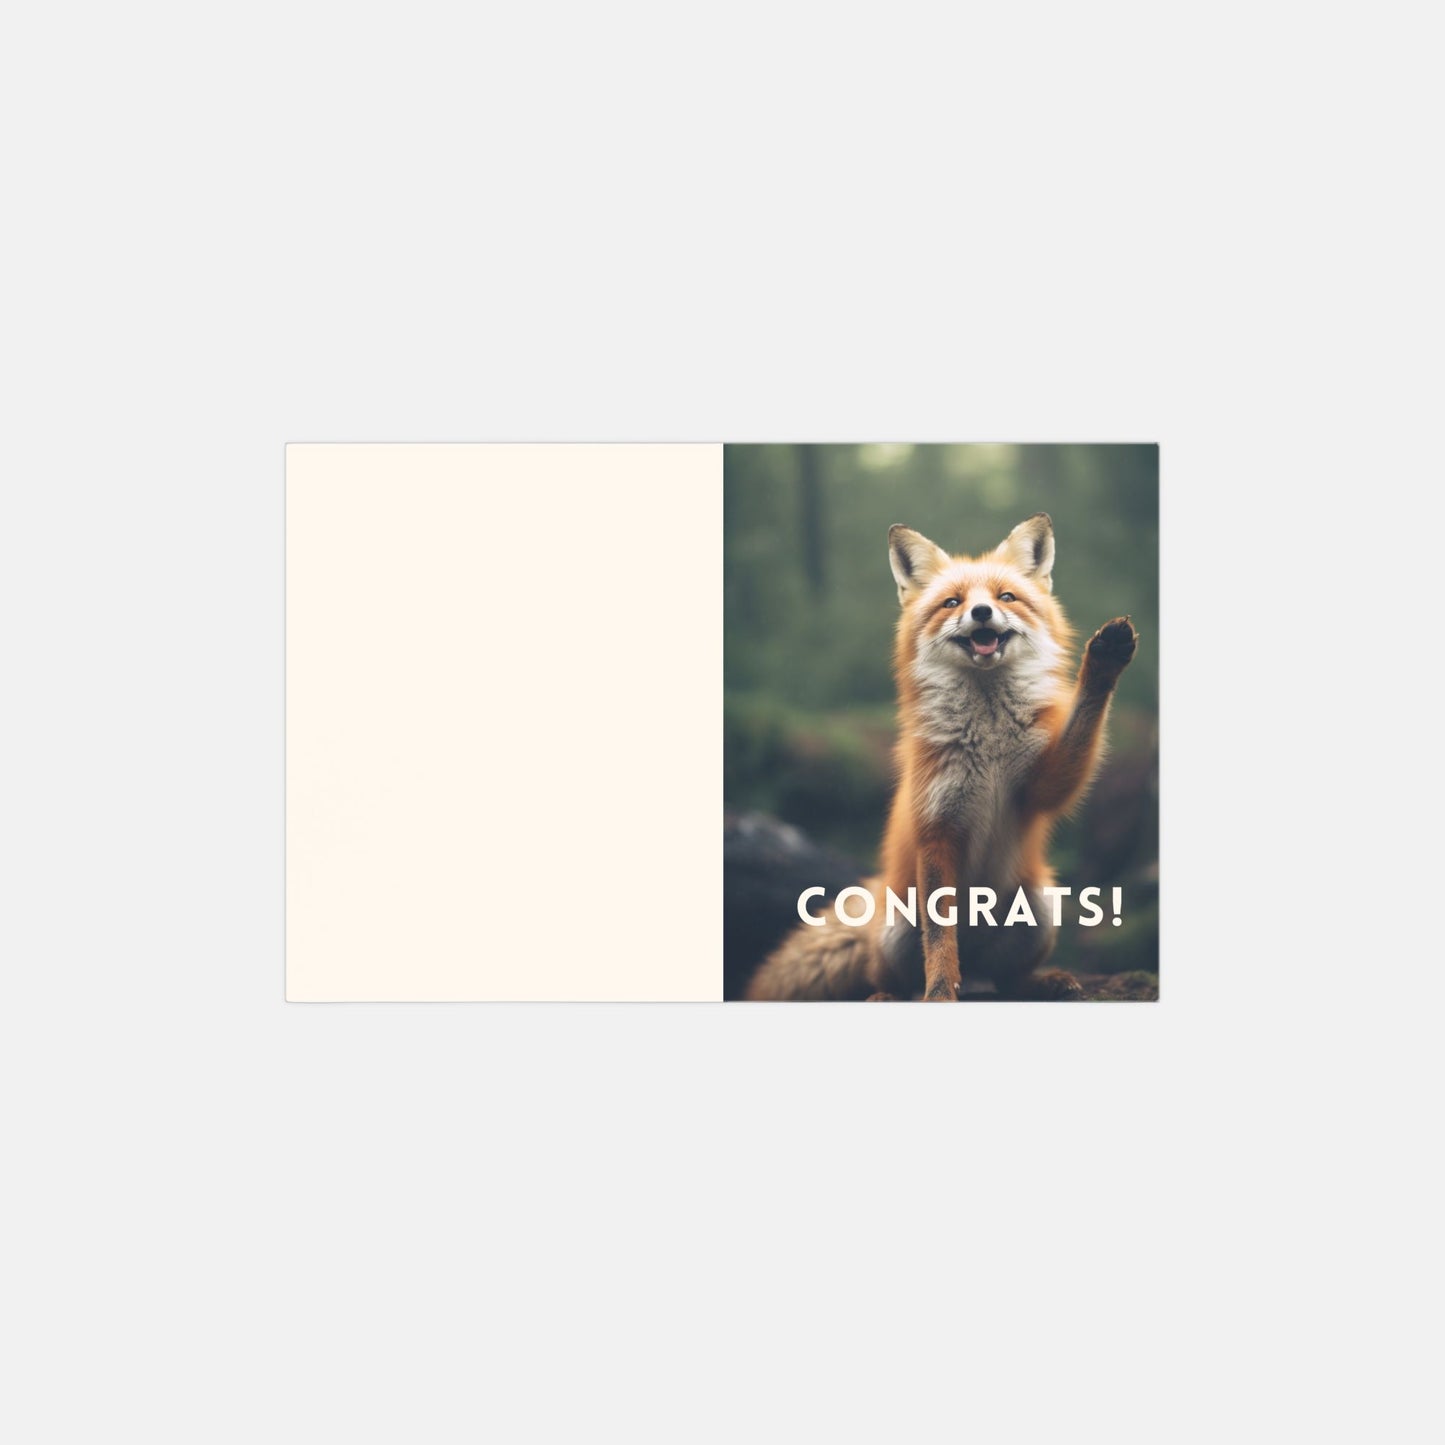 Red Fox Congratulations Cards - 10 pack